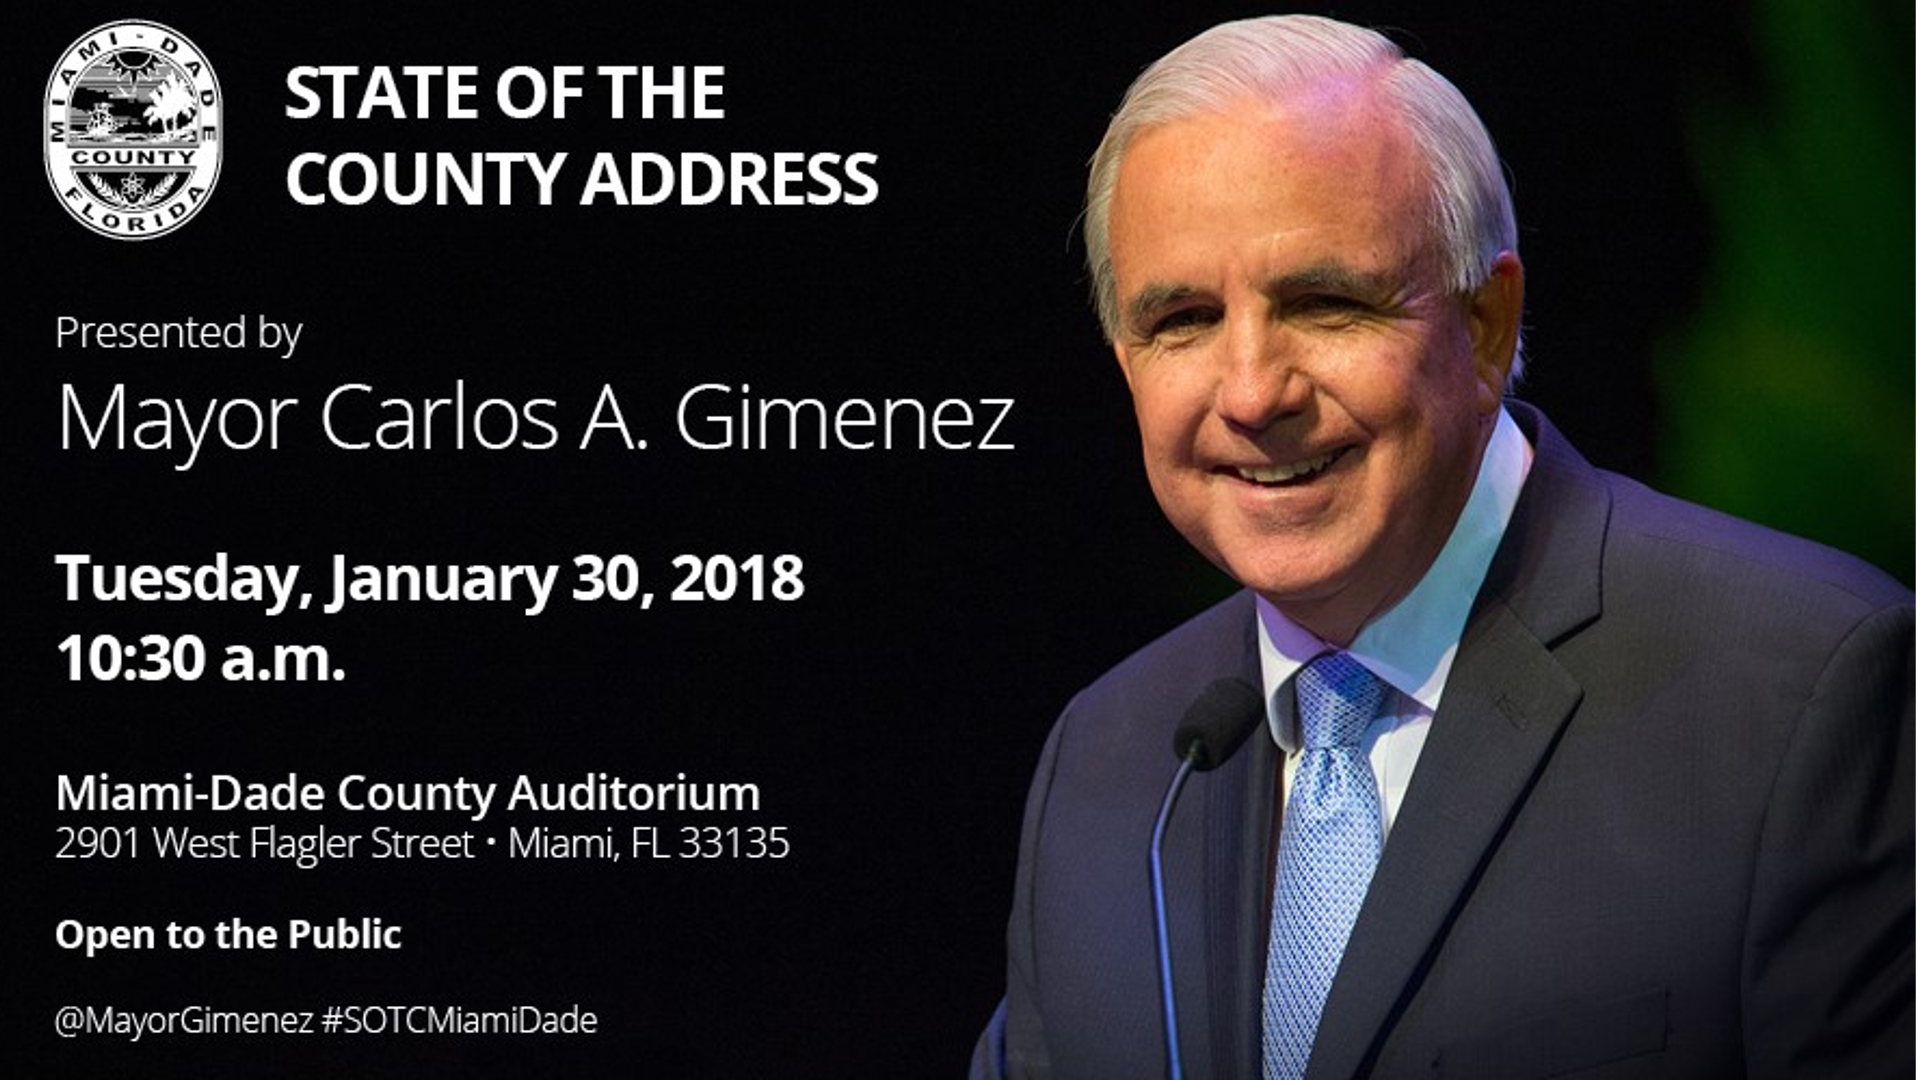 State of the County Address web